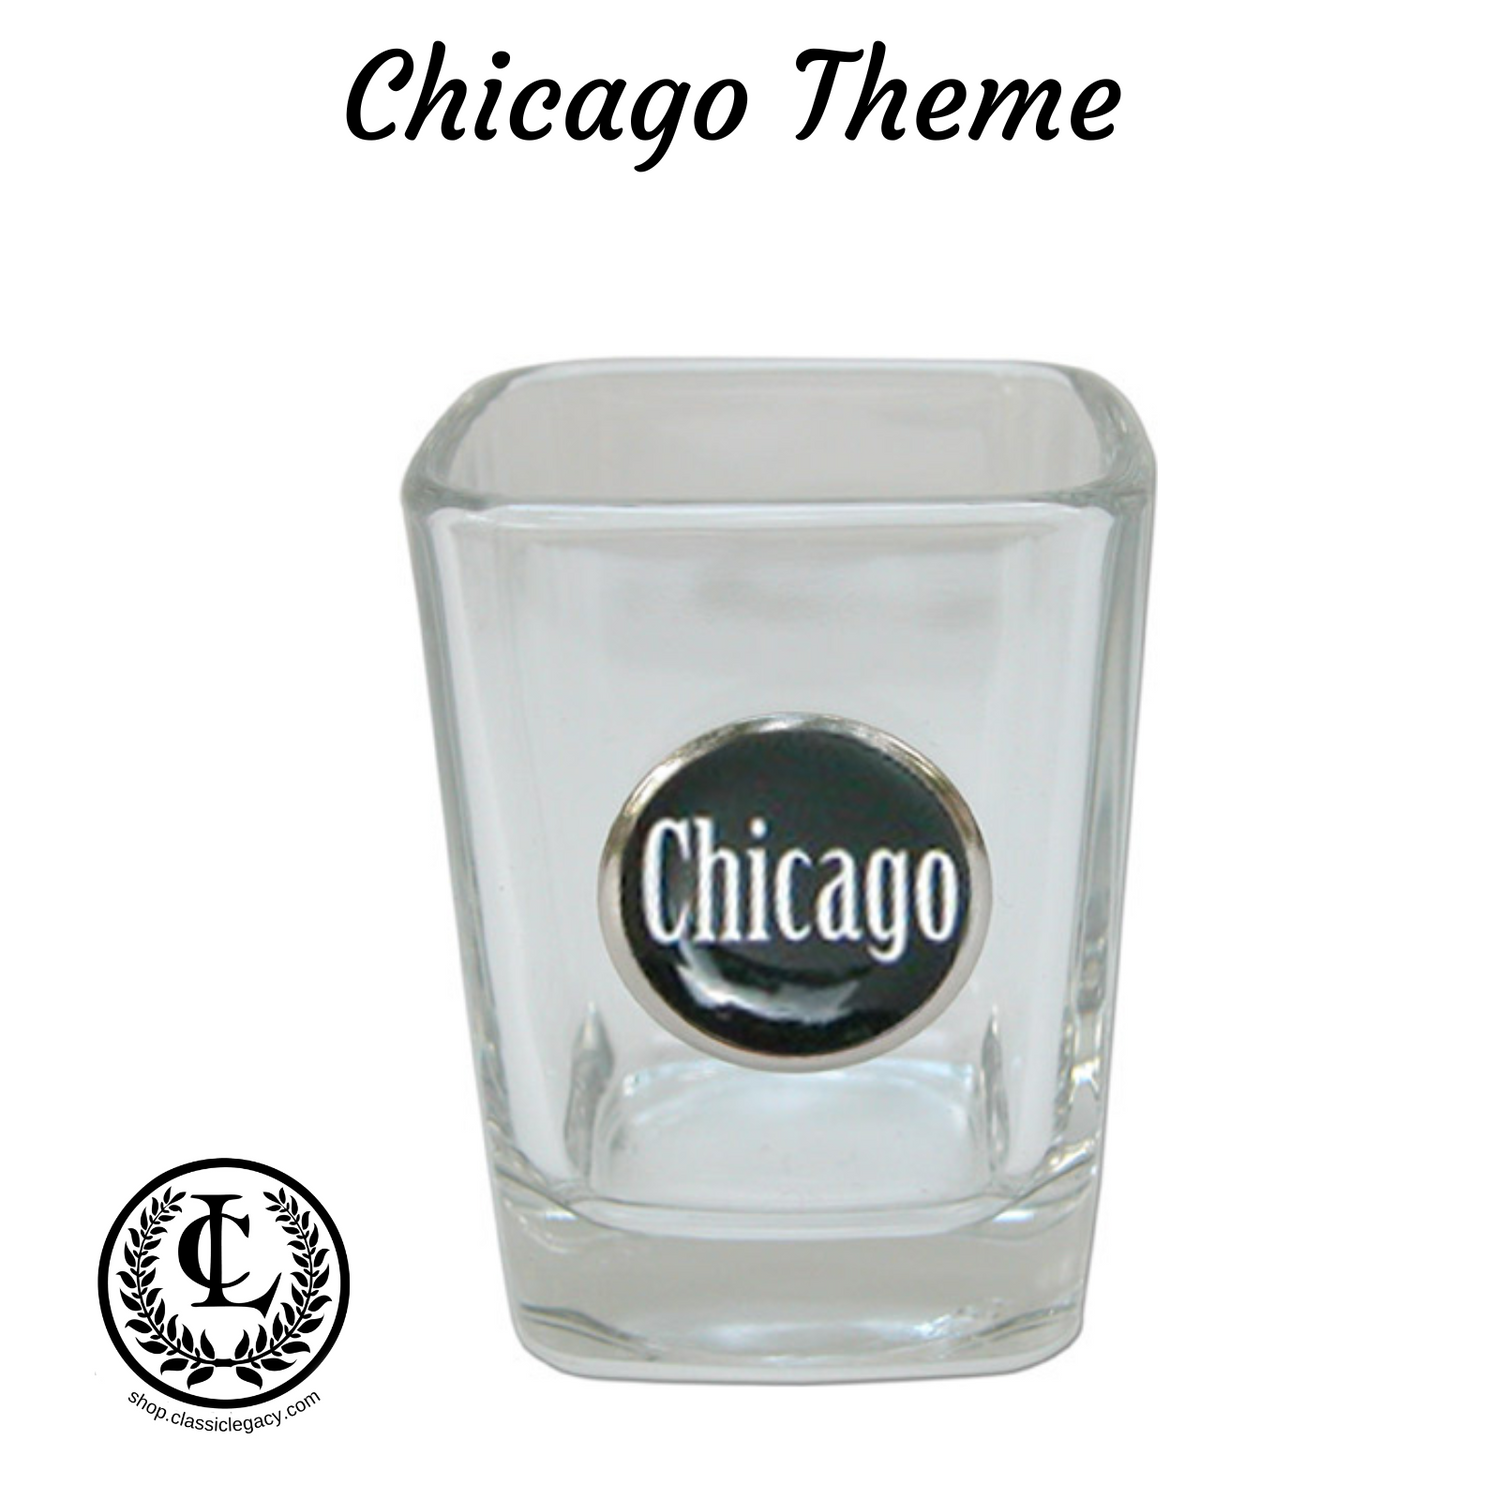 Chicago Theme Gifts